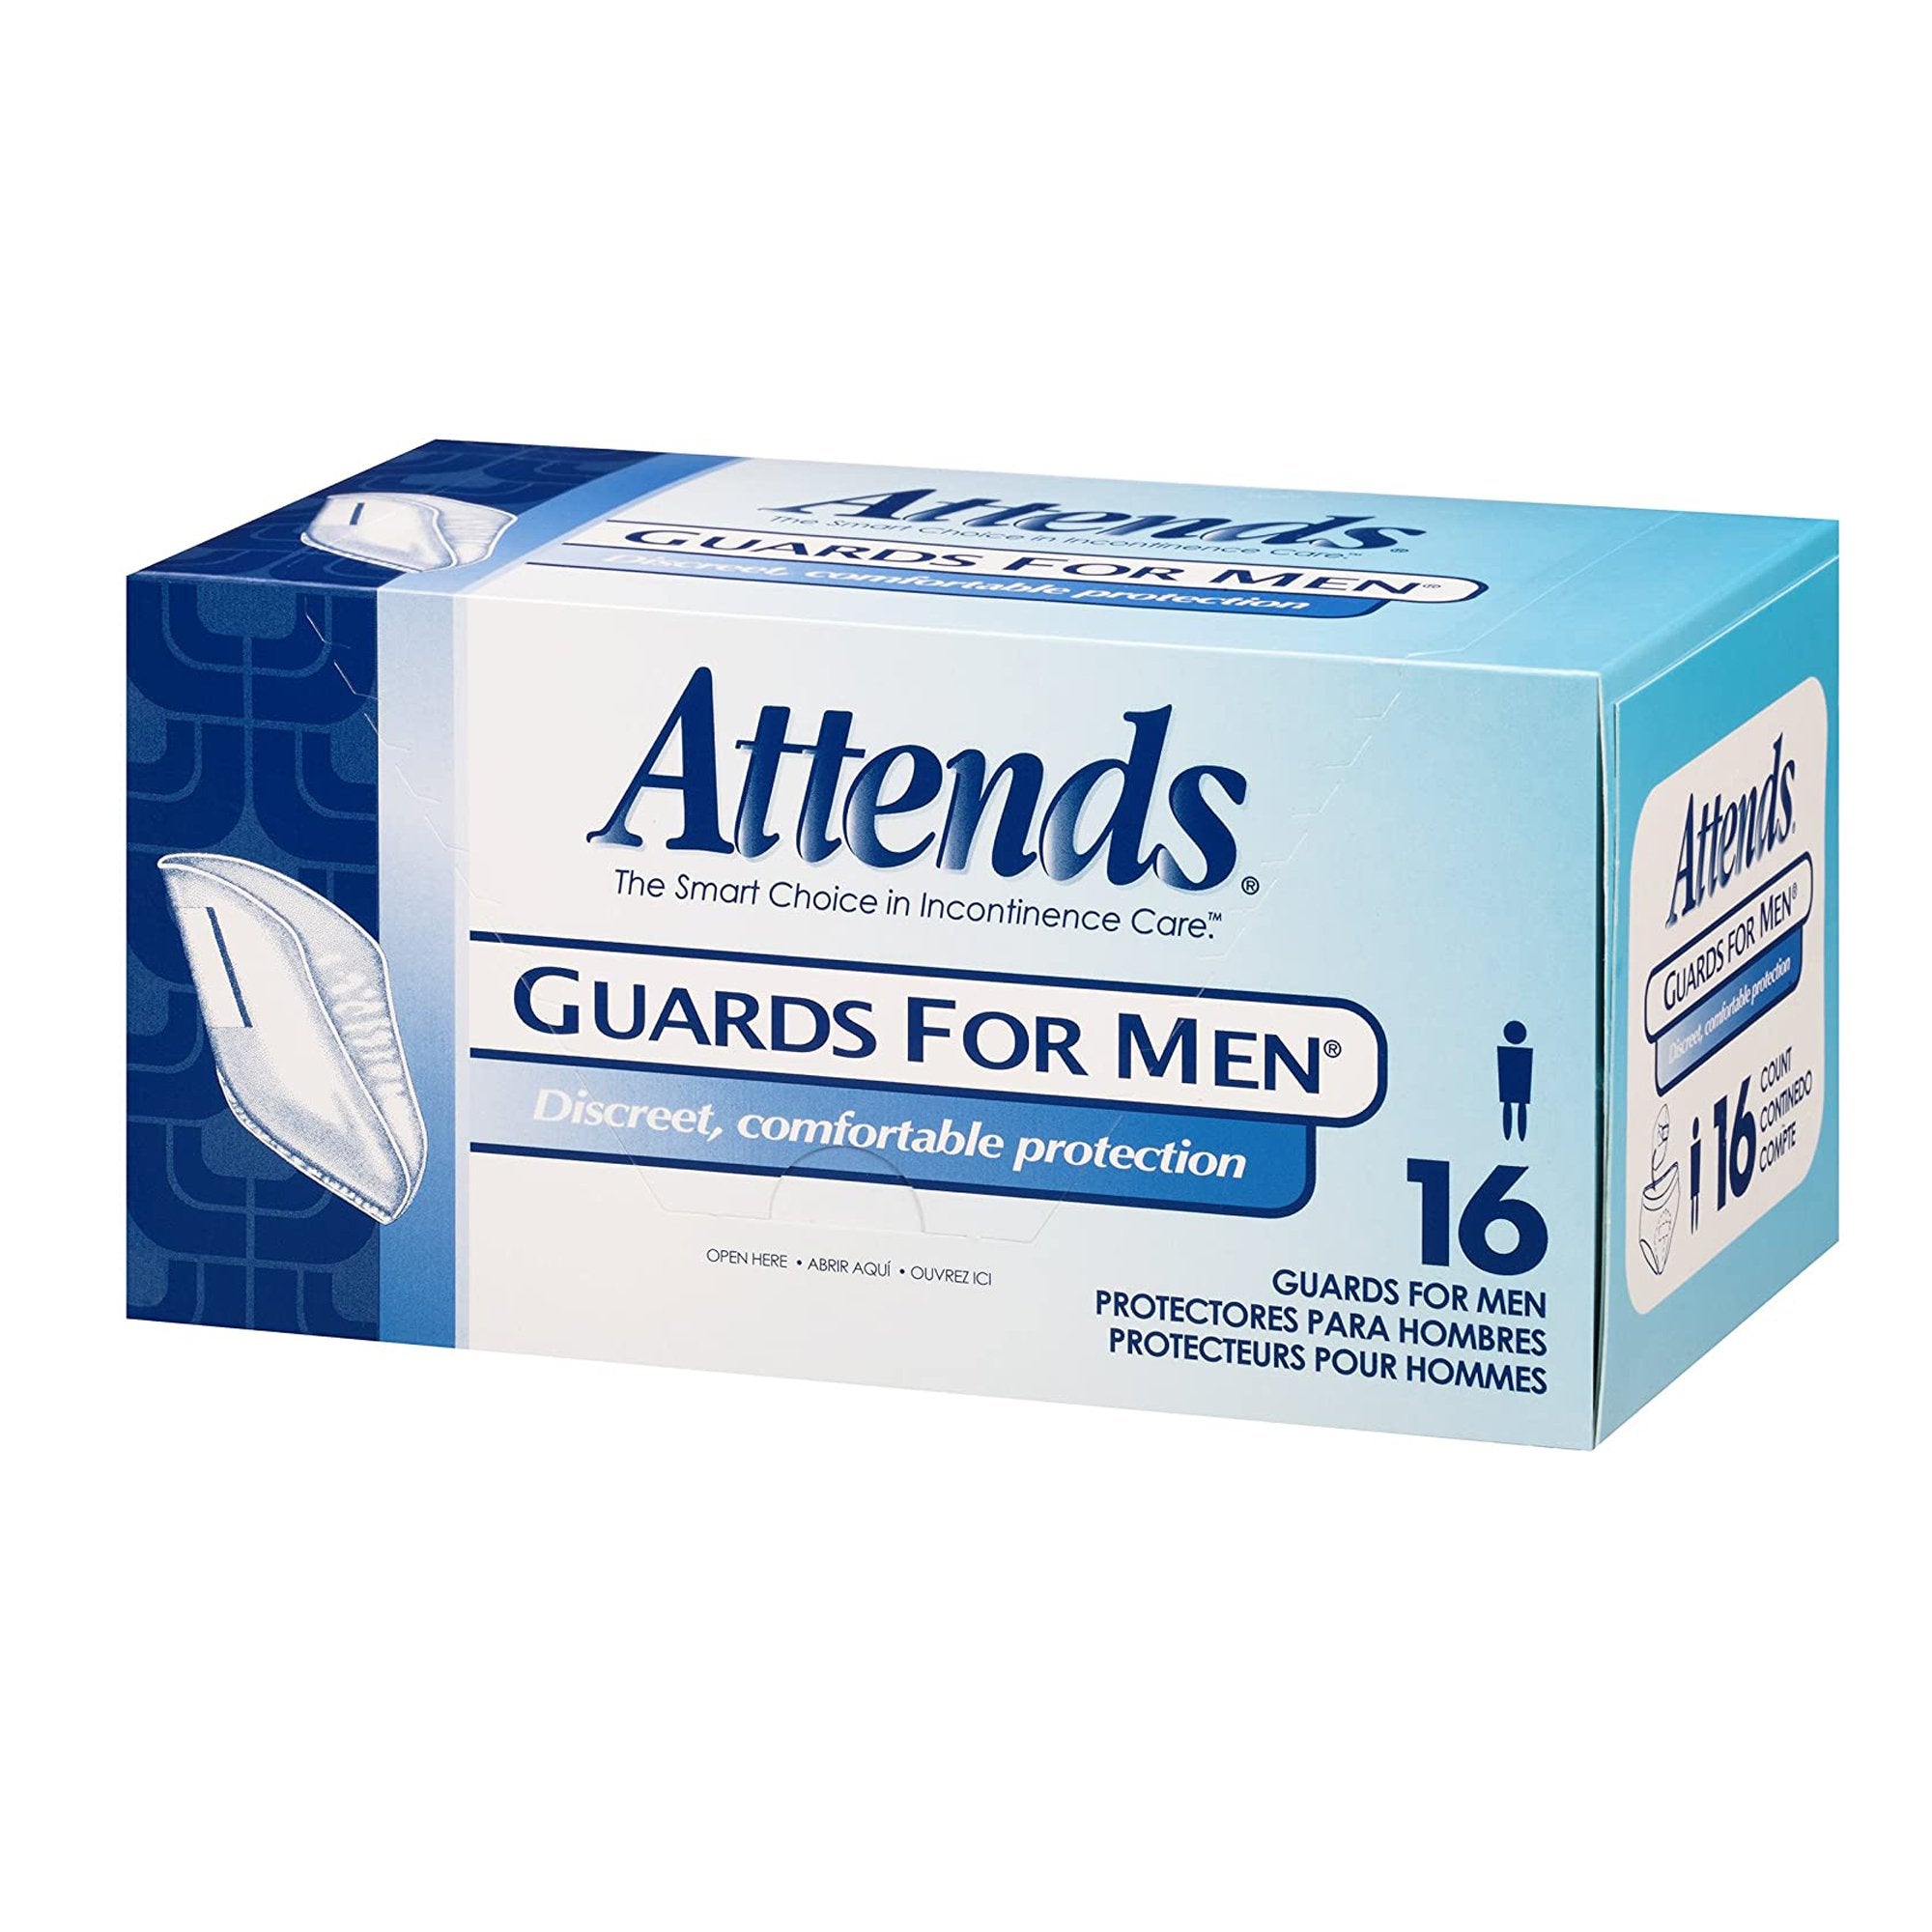 Attends® Guards For Men® Bladder Control Pad (16 Units)